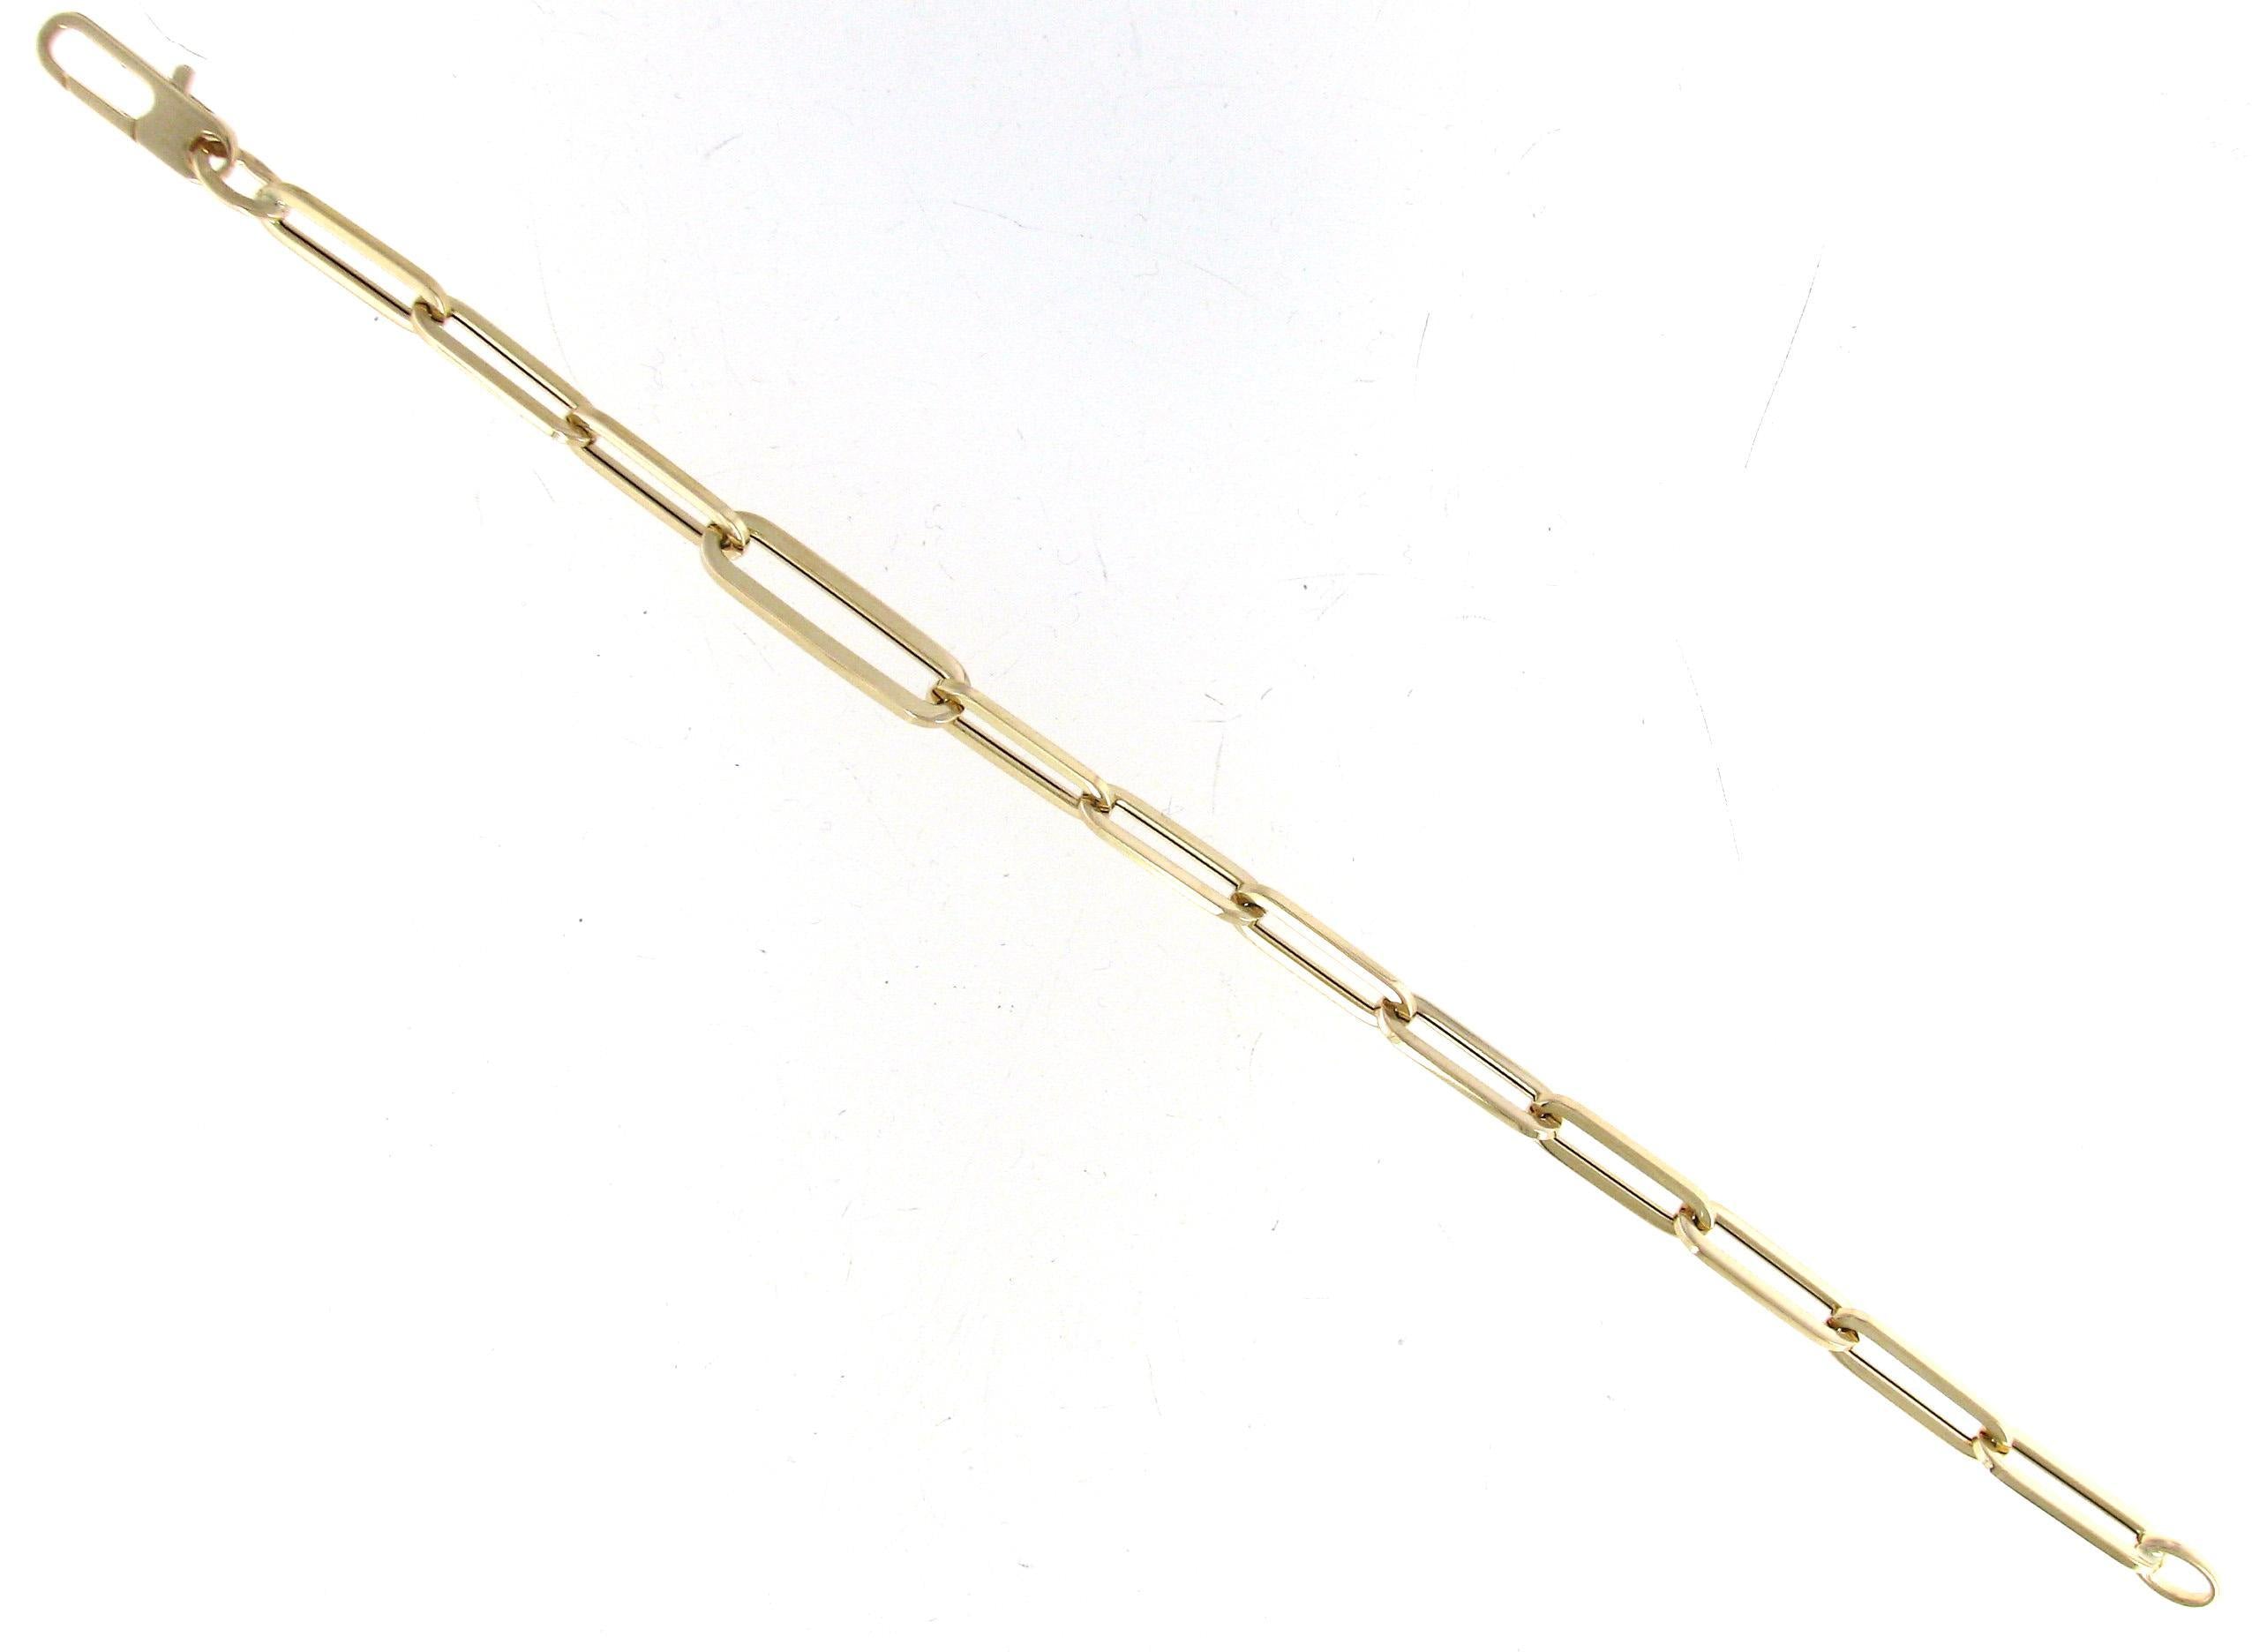 ROBERTO COIN 18K YELLOW GOLD PAPERCLIP BRACELET